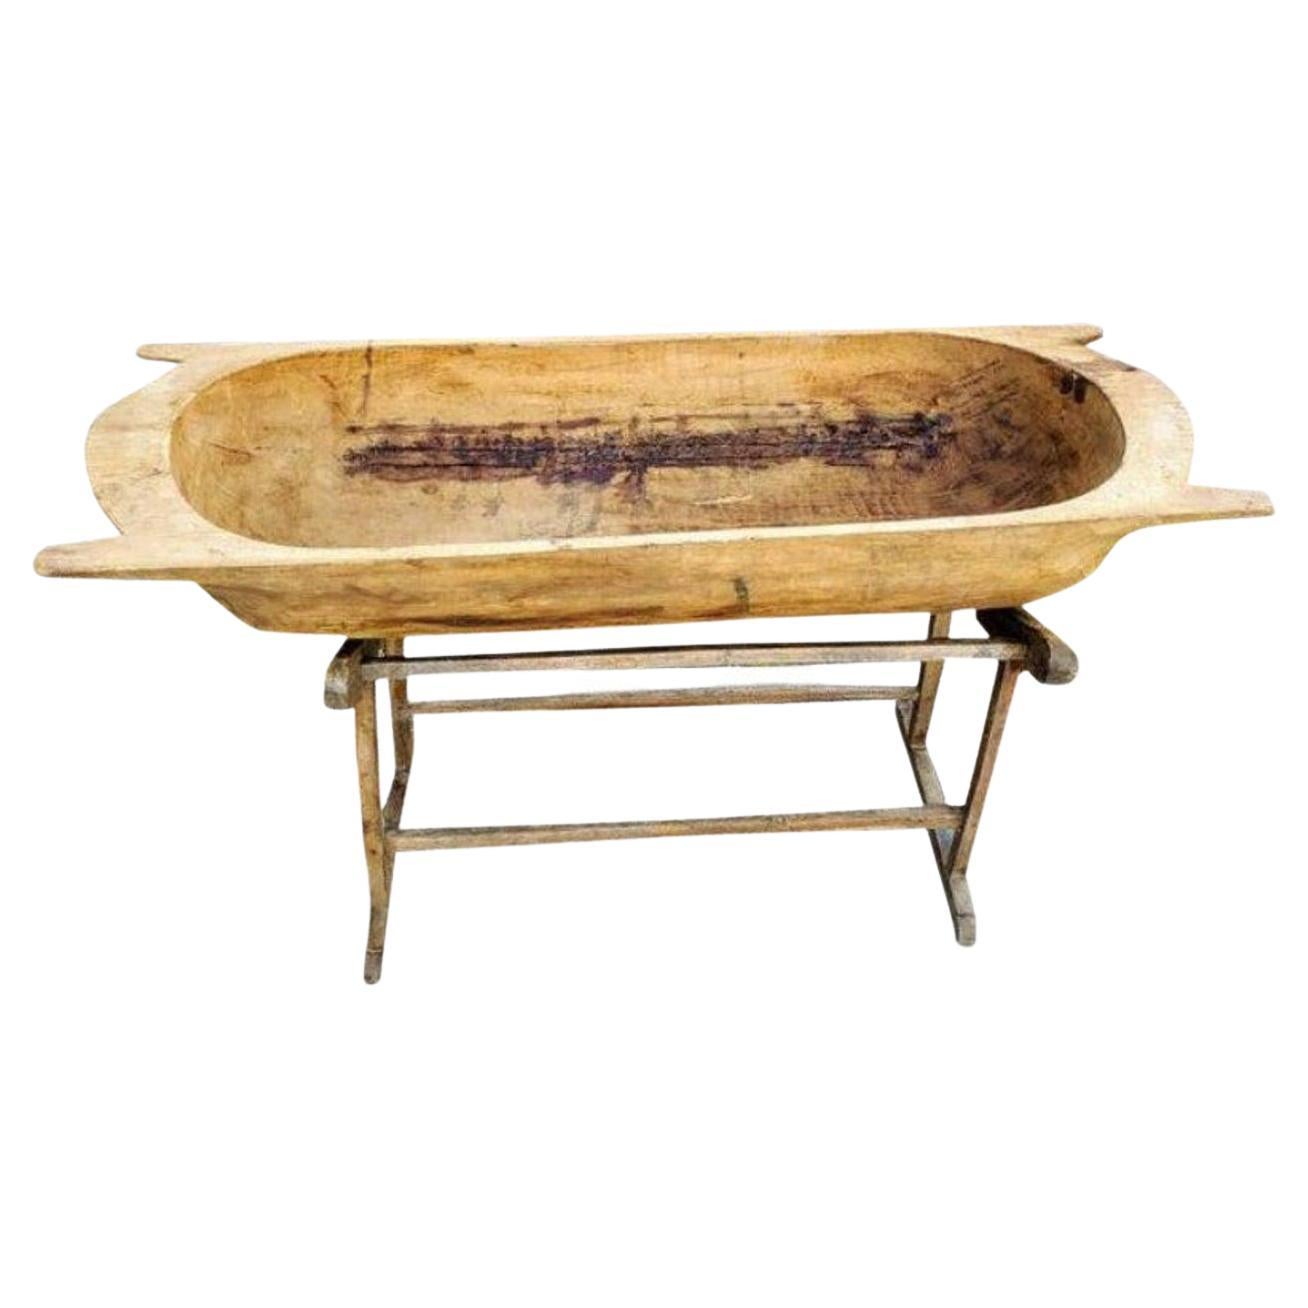 https://a.1stdibscdn.com/rustic-wooden-dough-trough-on-stand-for-sale/f_59772/f_270874021643233450906/f_27087402_1643233451230_bg_processed.jpg